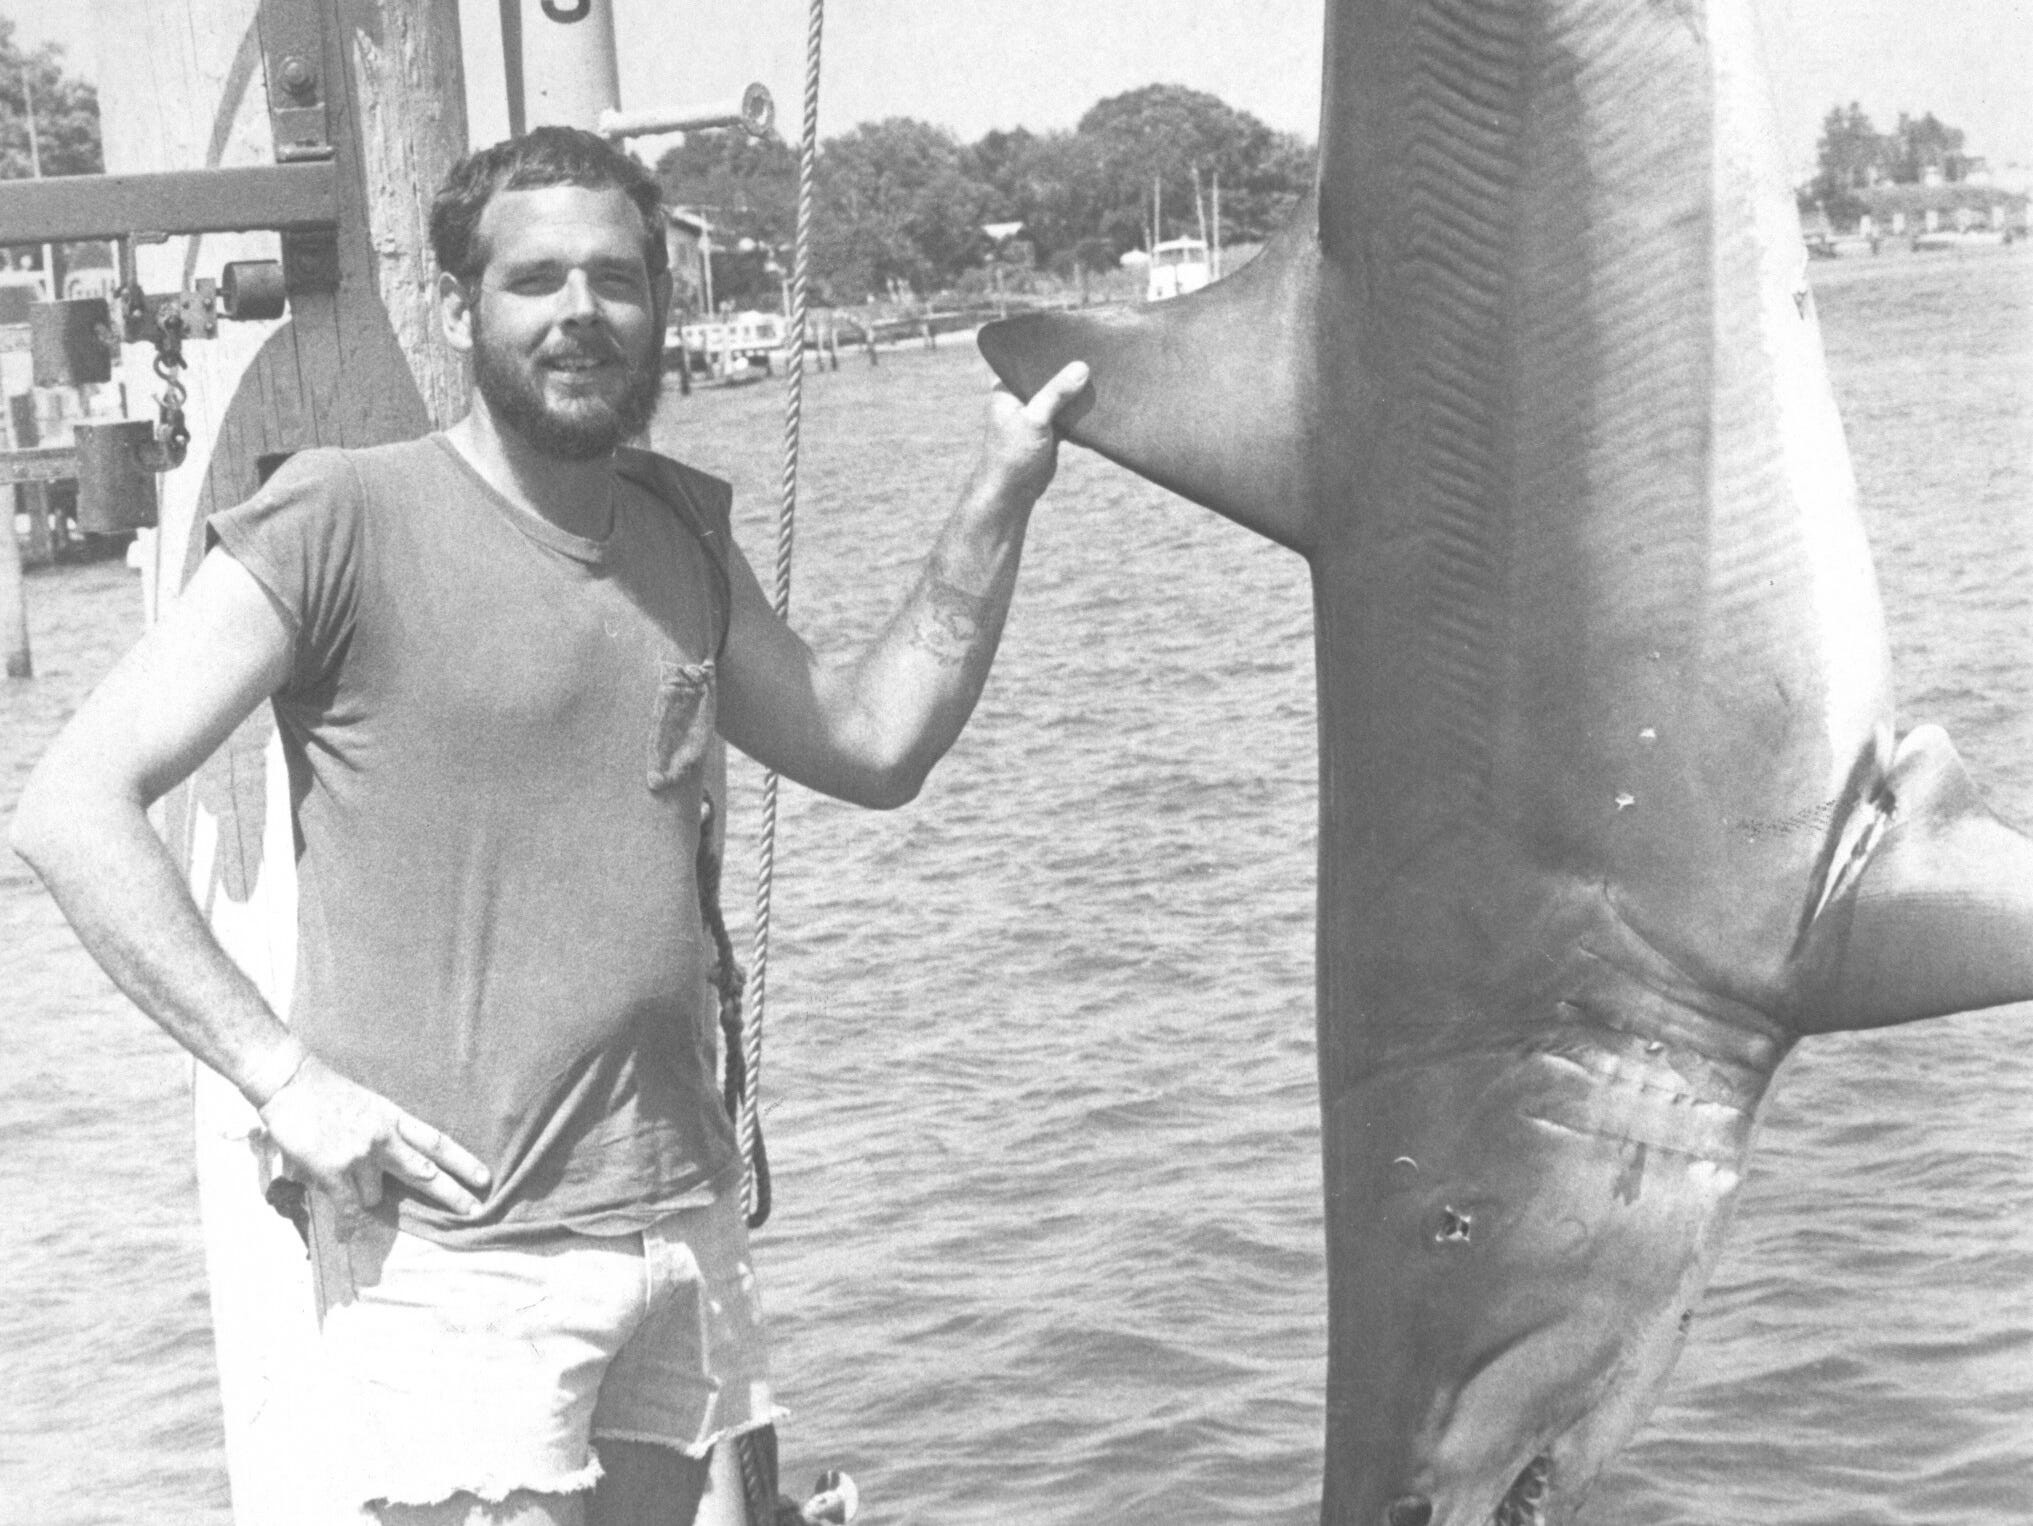 (JULY 11, 1983) This 474-pound mako shark was worth $7,000 to the crew on Ed Springsteen's Scrap Copper. It was the heaviest mako weighed in Hoffman's Anchorage (Brielle) shark tournament. Standing next to the shark is crew member John Troger from Point Pleasant.